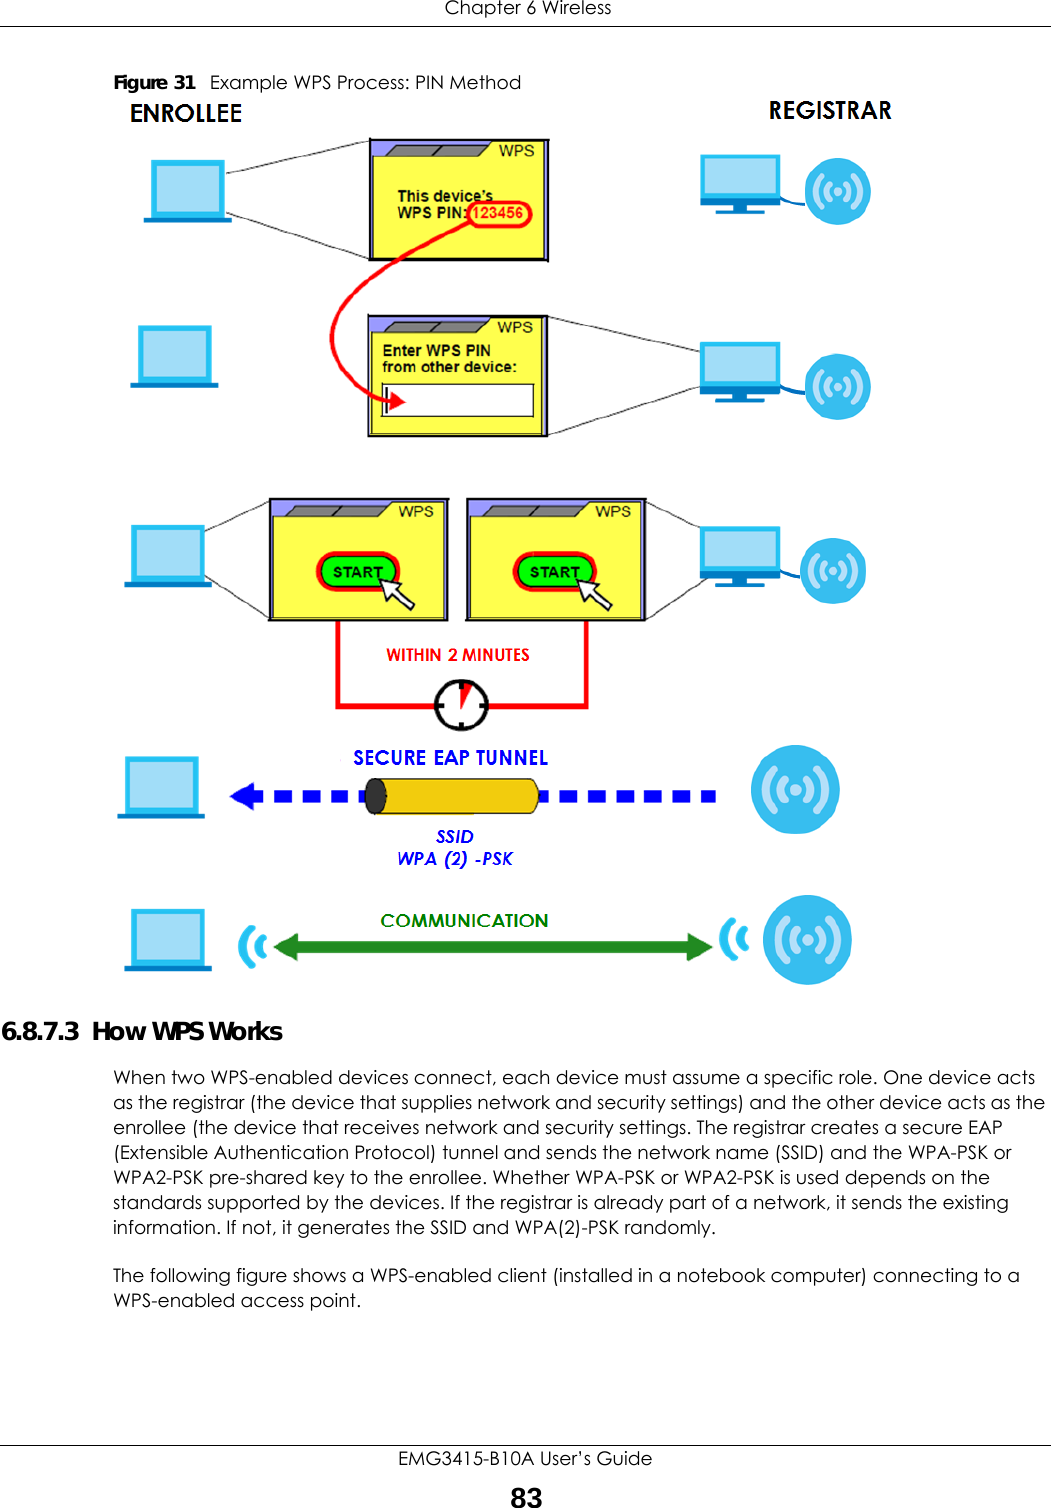  Chapter 6 WirelessEMG3415-B10A User’s Guide83Figure 31   Example WPS Process: PIN Method6.8.7.3  How WPS WorksWhen two WPS-enabled devices connect, each device must assume a specific role. One device acts as the registrar (the device that supplies network and security settings) and the other device acts as the enrollee (the device that receives network and security settings. The registrar creates a secure EAP (Extensible Authentication Protocol) tunnel and sends the network name (SSID) and the WPA-PSK or WPA2-PSK pre-shared key to the enrollee. Whether WPA-PSK or WPA2-PSK is used depends on the standards supported by the devices. If the registrar is already part of a network, it sends the existing information. If not, it generates the SSID and WPA(2)-PSK randomly.The following figure shows a WPS-enabled client (installed in a notebook computer) connecting to a WPS-enabled access point.